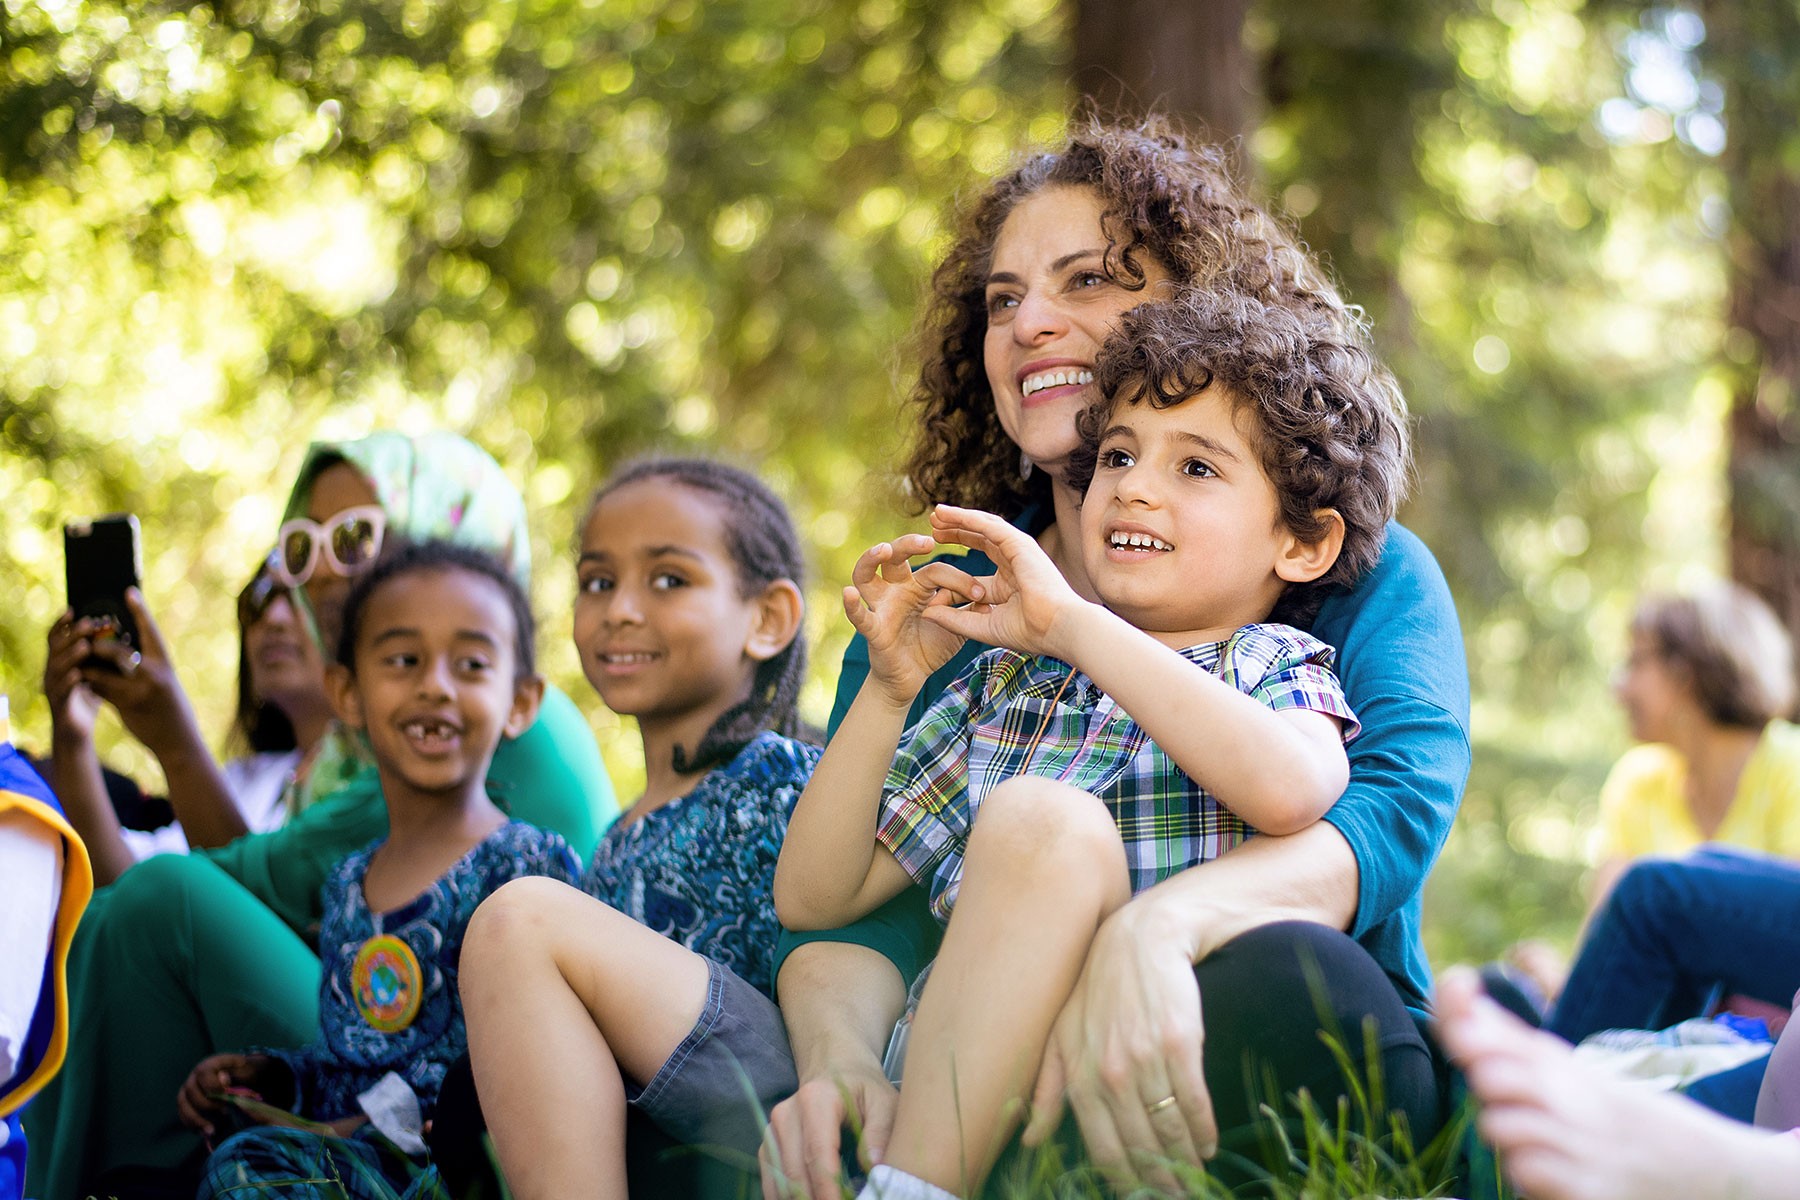 Kids and adults enjoy a sunny outdoor presentation under the trees.